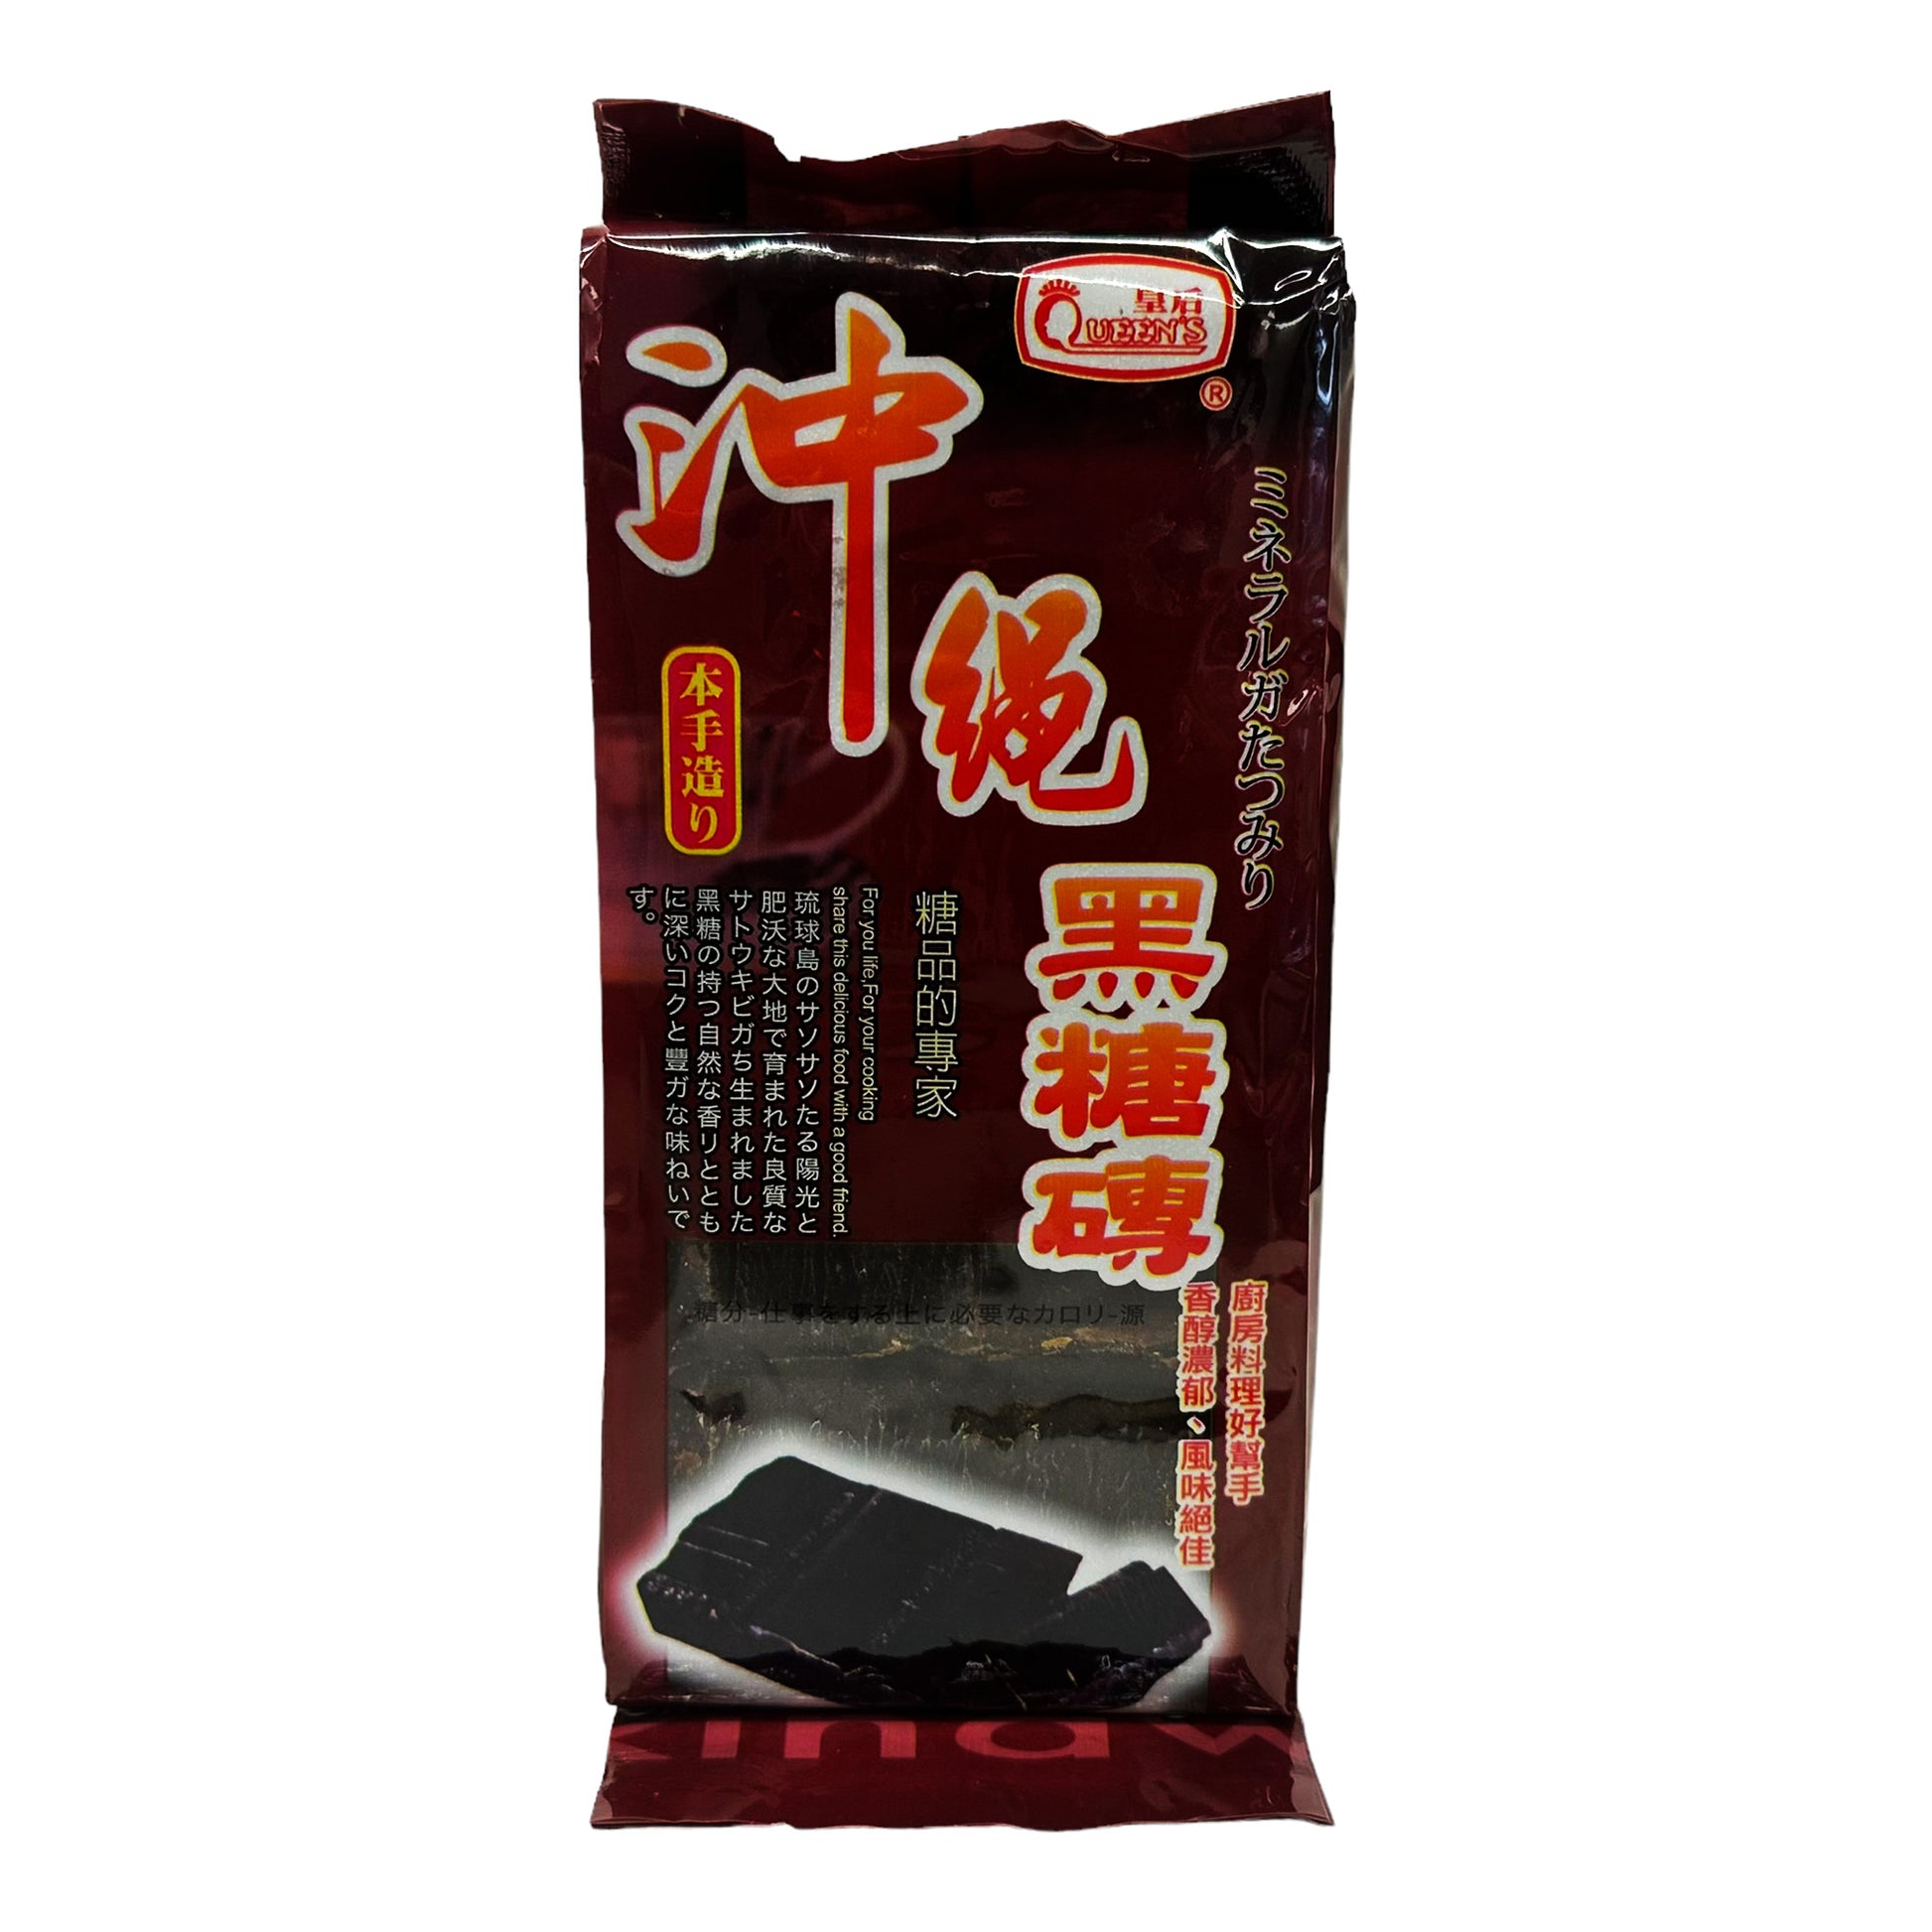 Front graphic image of Queen's Okinawa Black Sugar 14oz (400g)